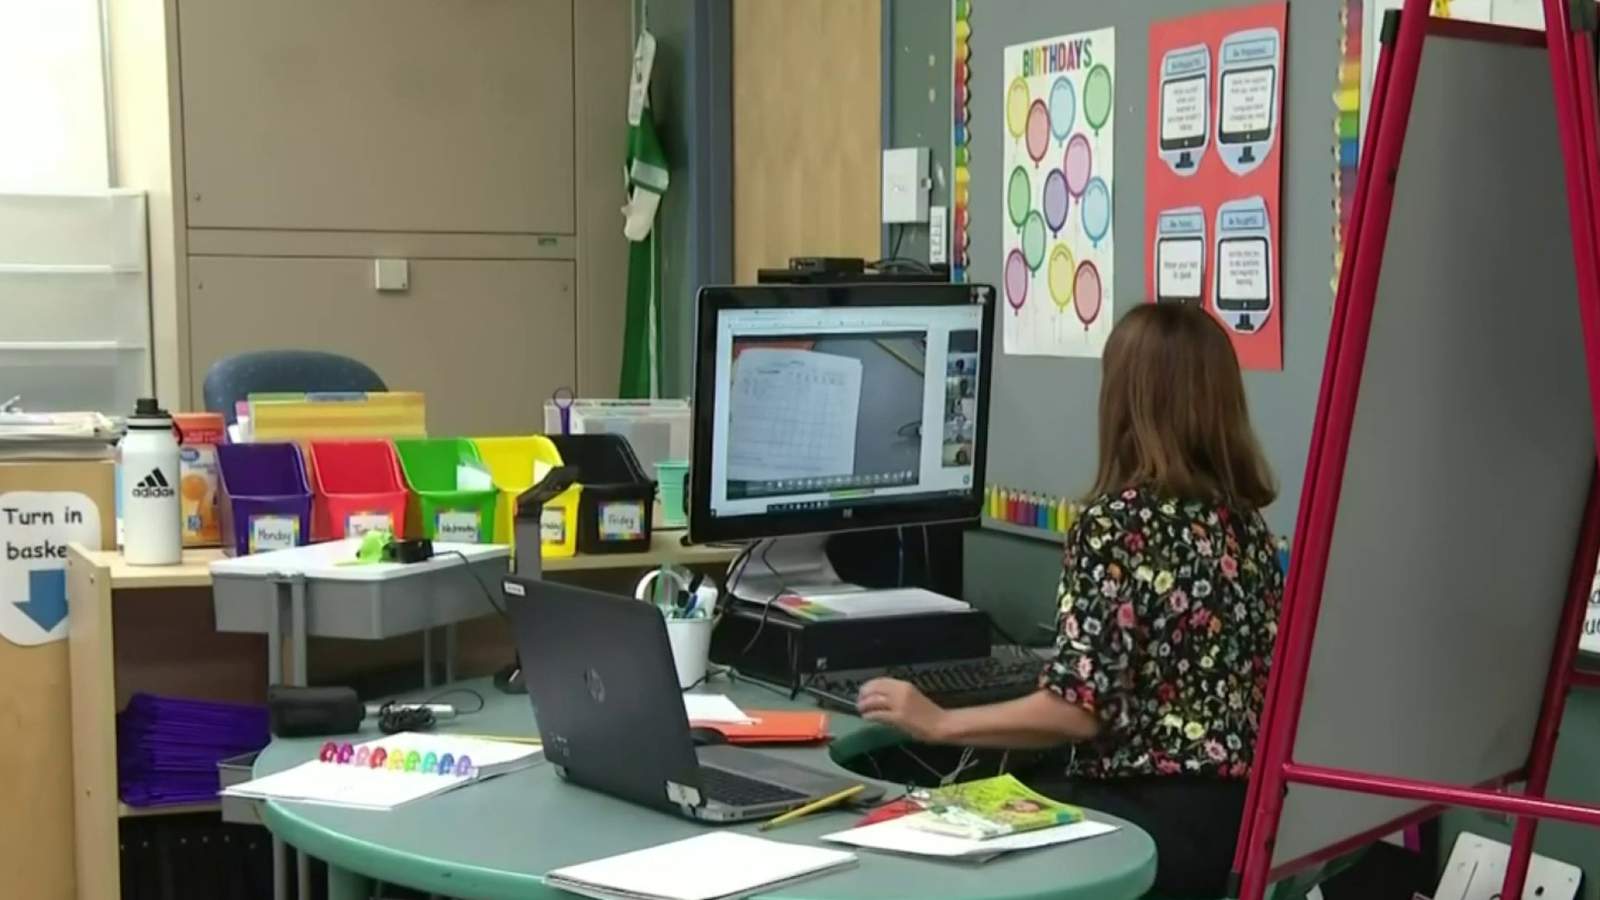 Avondale schools start remotely, but aims to switch to in-person